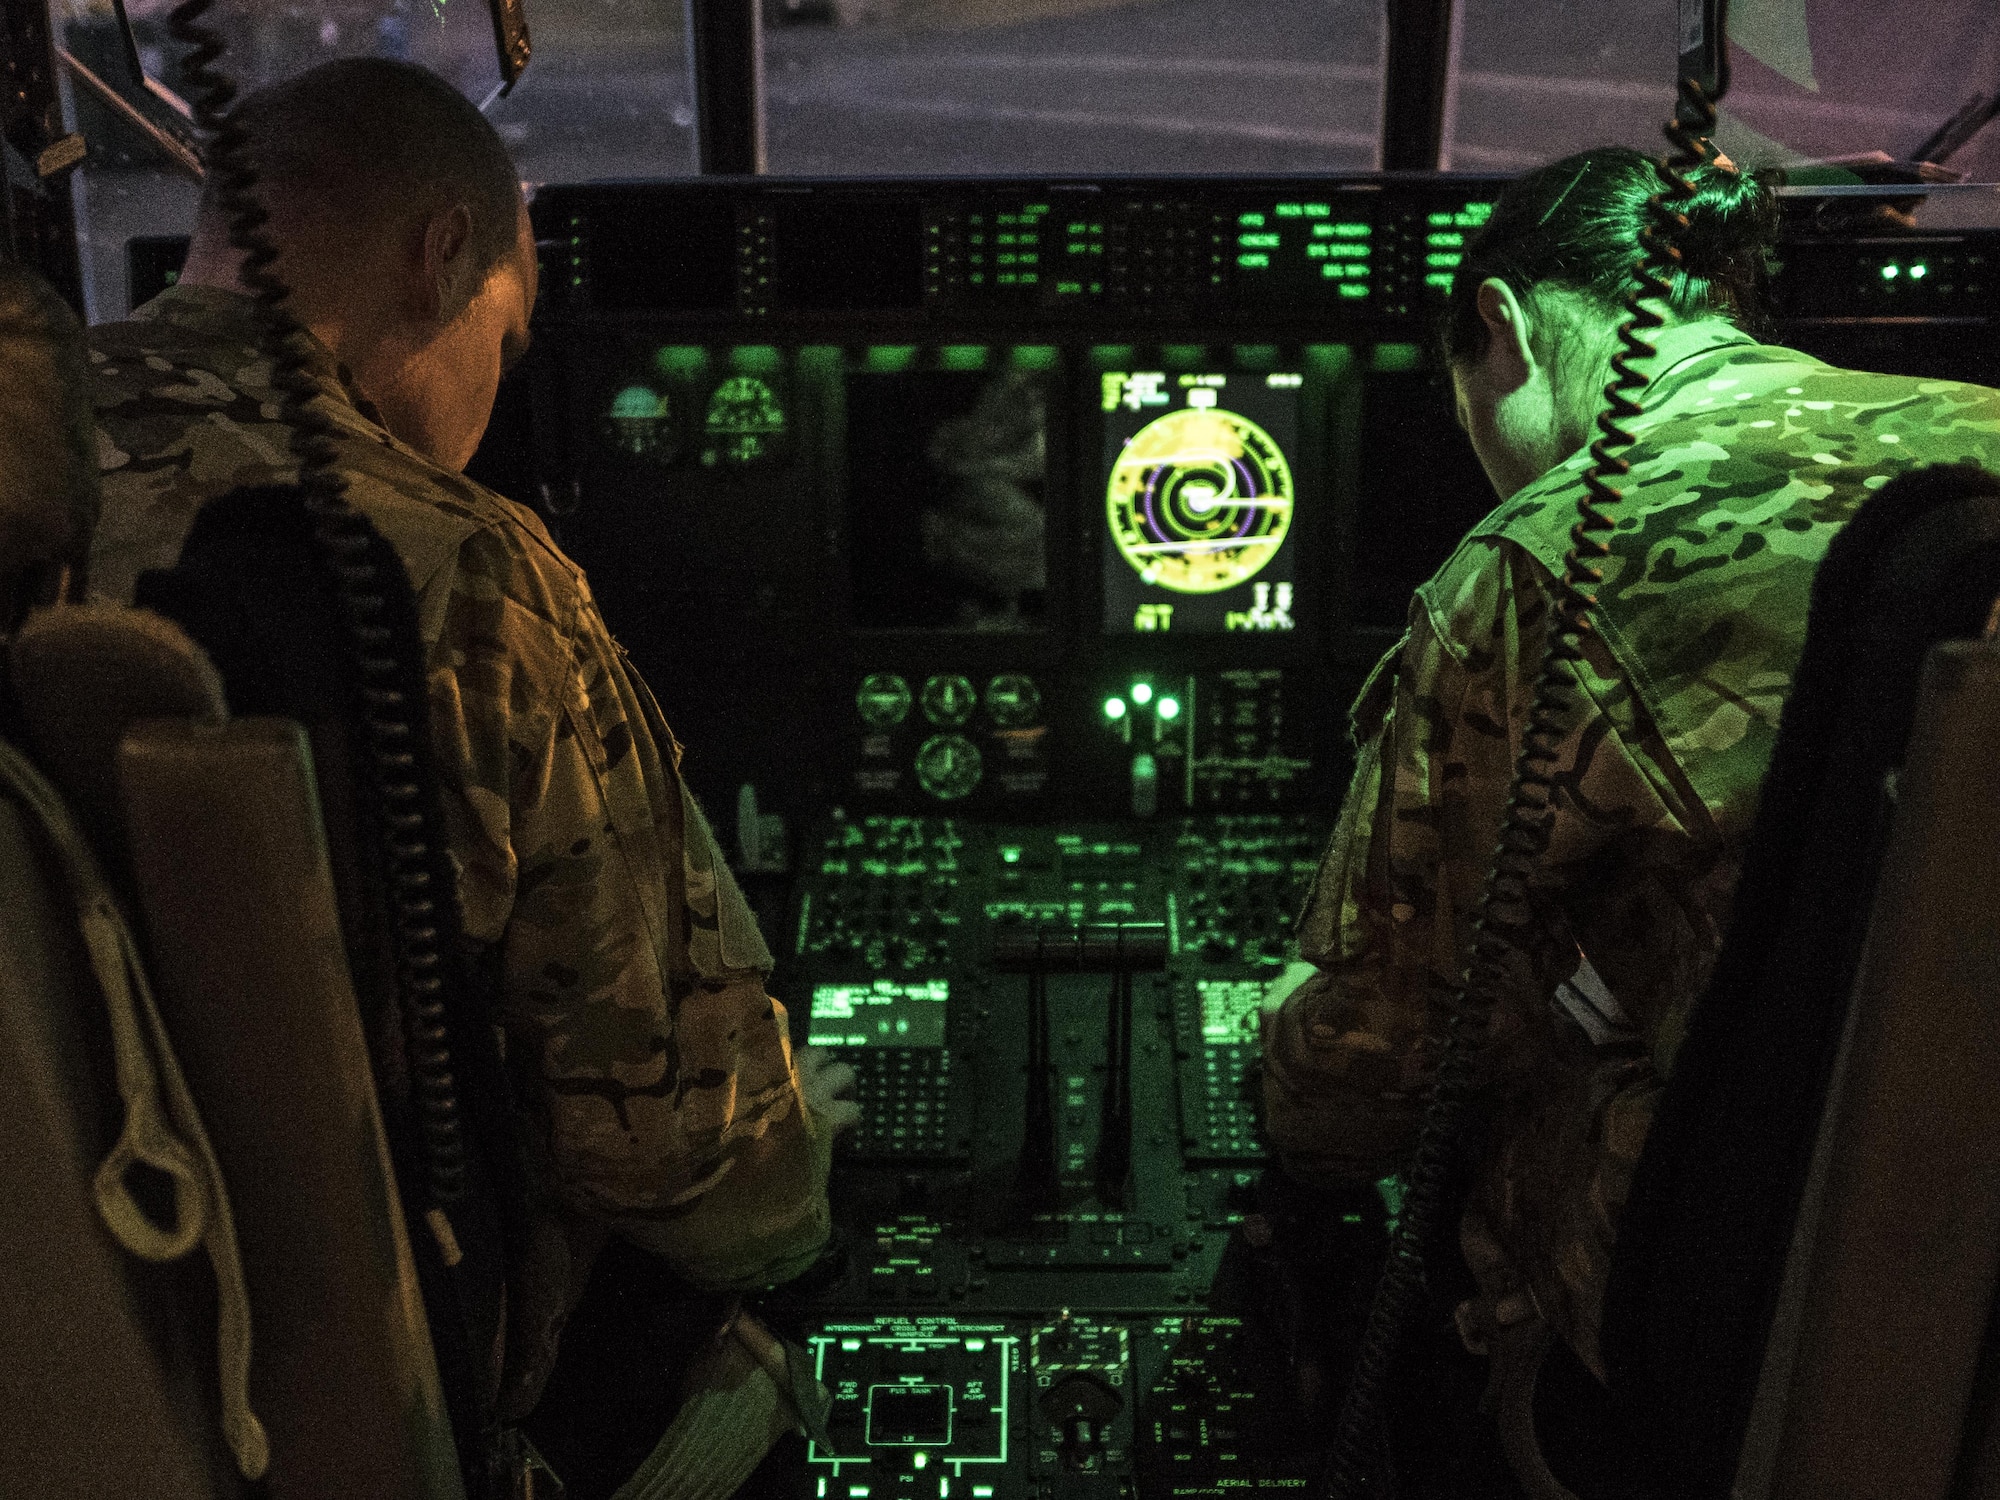 U.S. Air Force 17th Special Operations Squadron MC-130J Commando II pilots prepare for take-off prior to high altitude, high opening (HAHO) jump operations July 11, 2017, at Rockhampton, Australia during Talisman Saber 2017. Experts in specialized aviation, the 17th SOS conducts training operations often to ensure they are always ready perform a variety of high-priority, low-visibility missions throughout the Indo-Asia-Pacific-Region. (U.S. Air Force photo by Capt. Jessica Tait)